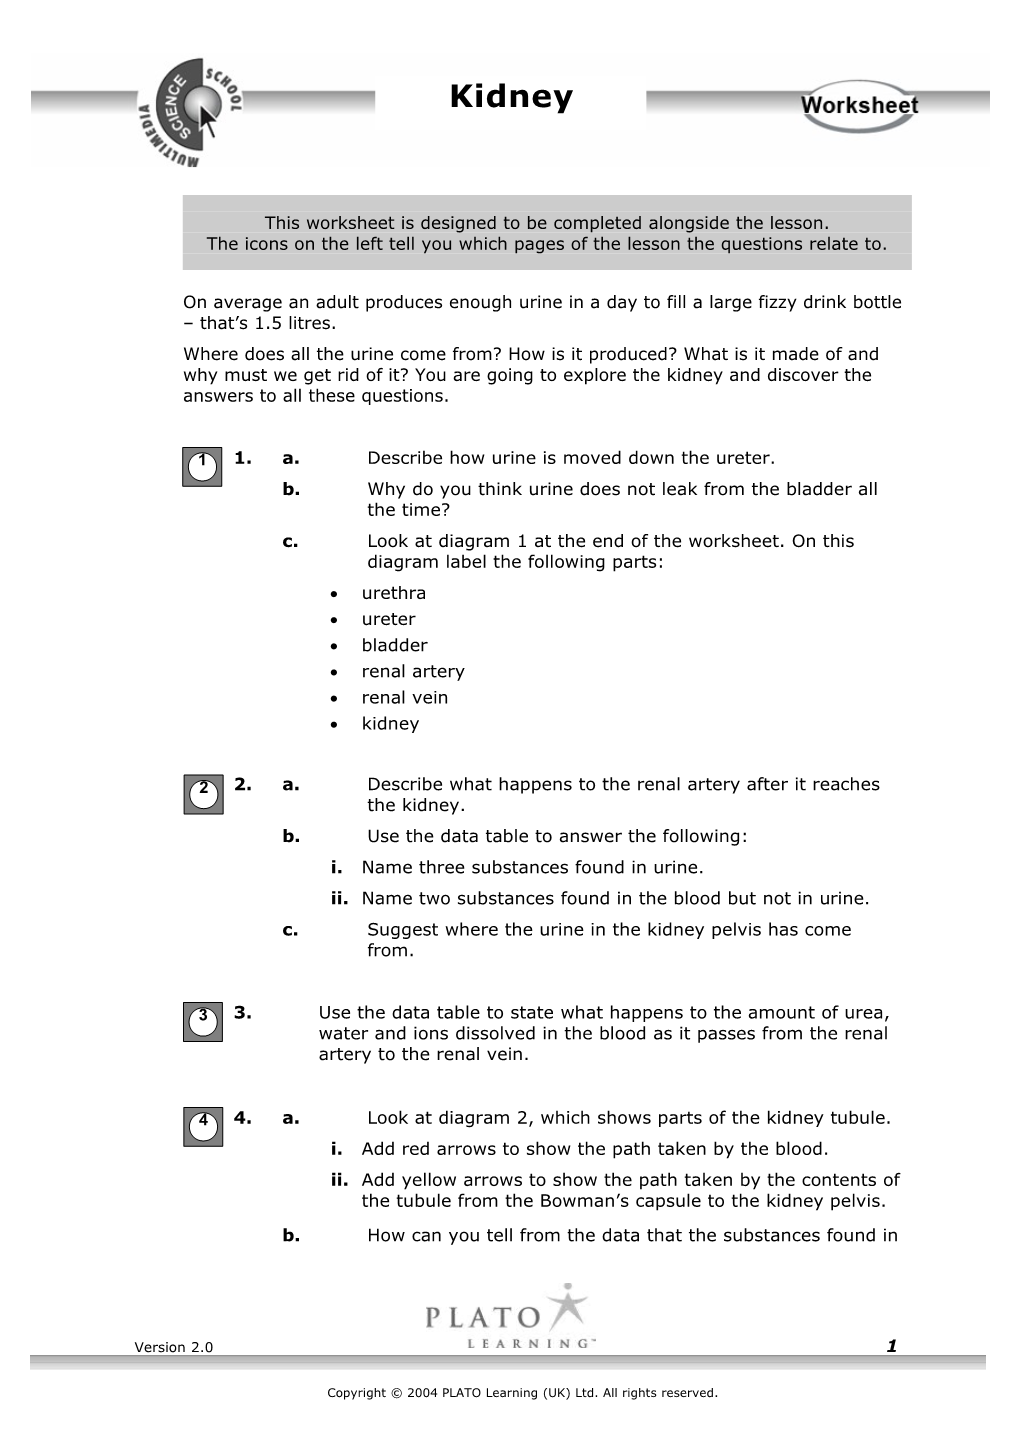 This Worksheet Is Designed to Be Completed Alongside the Lesson